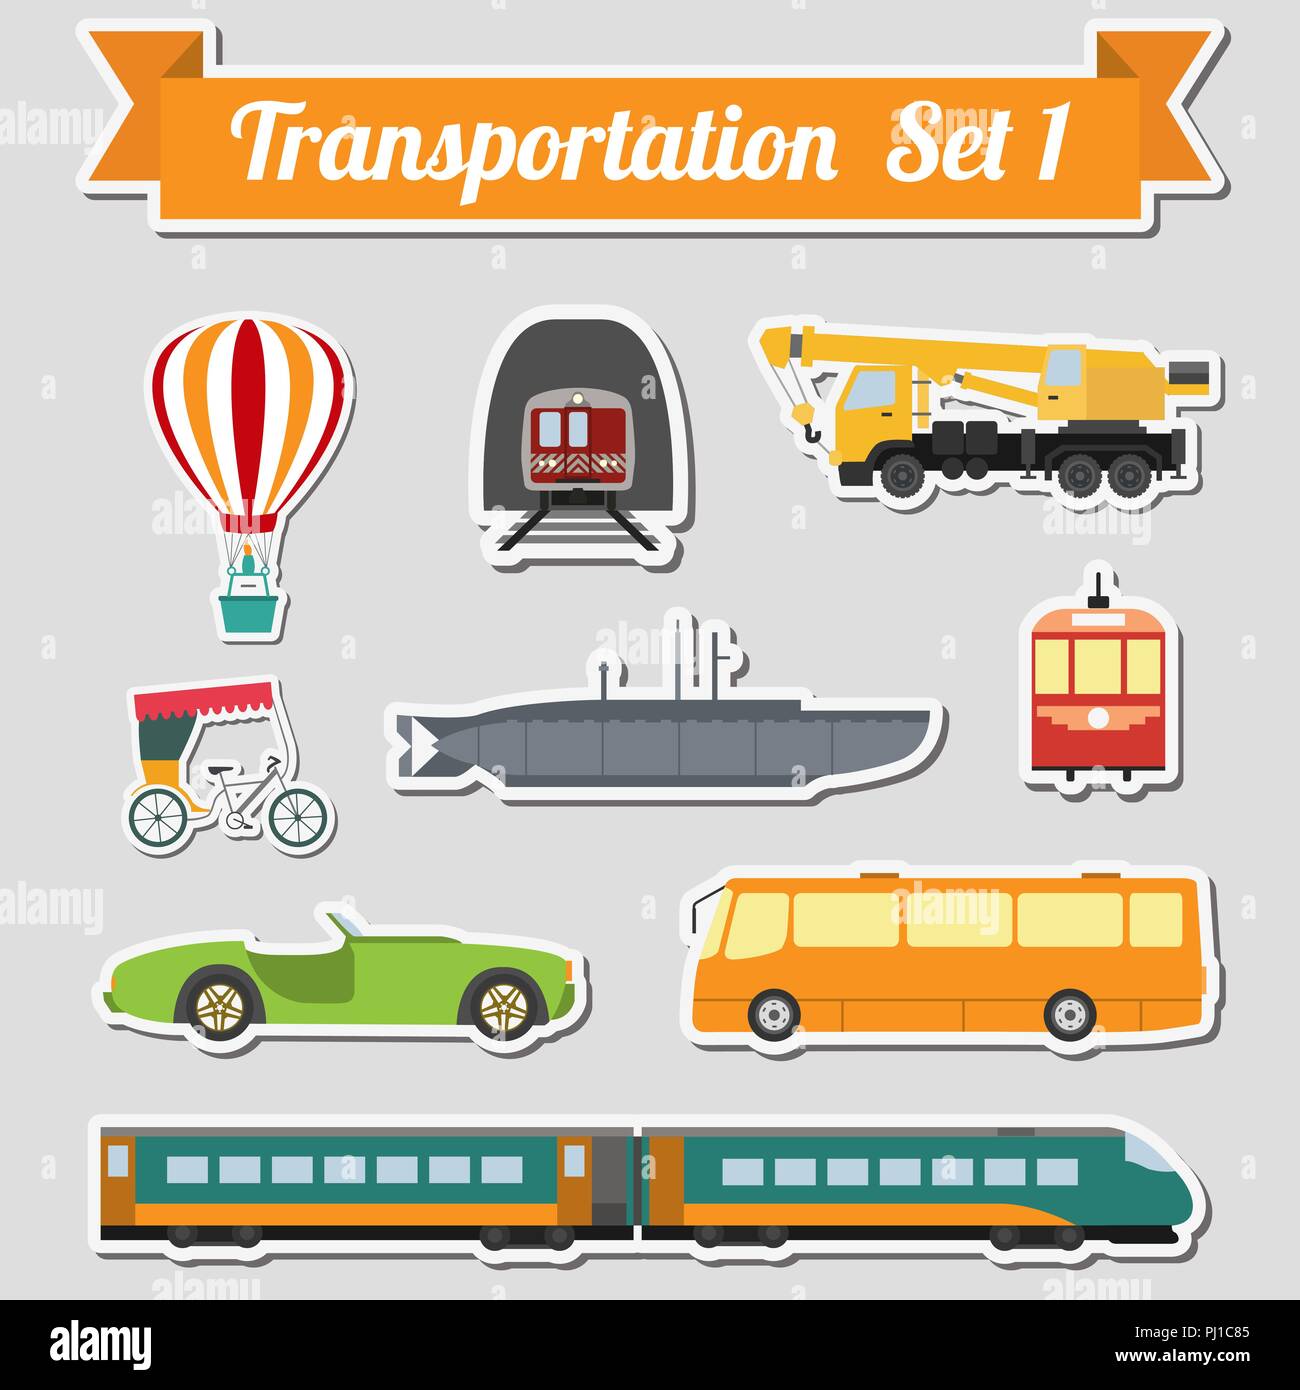 Set of all types of transport icon  for creating your own infographics or maps. Water, road, urban, air, cargo, public and ground transportation set.  Stock Vector